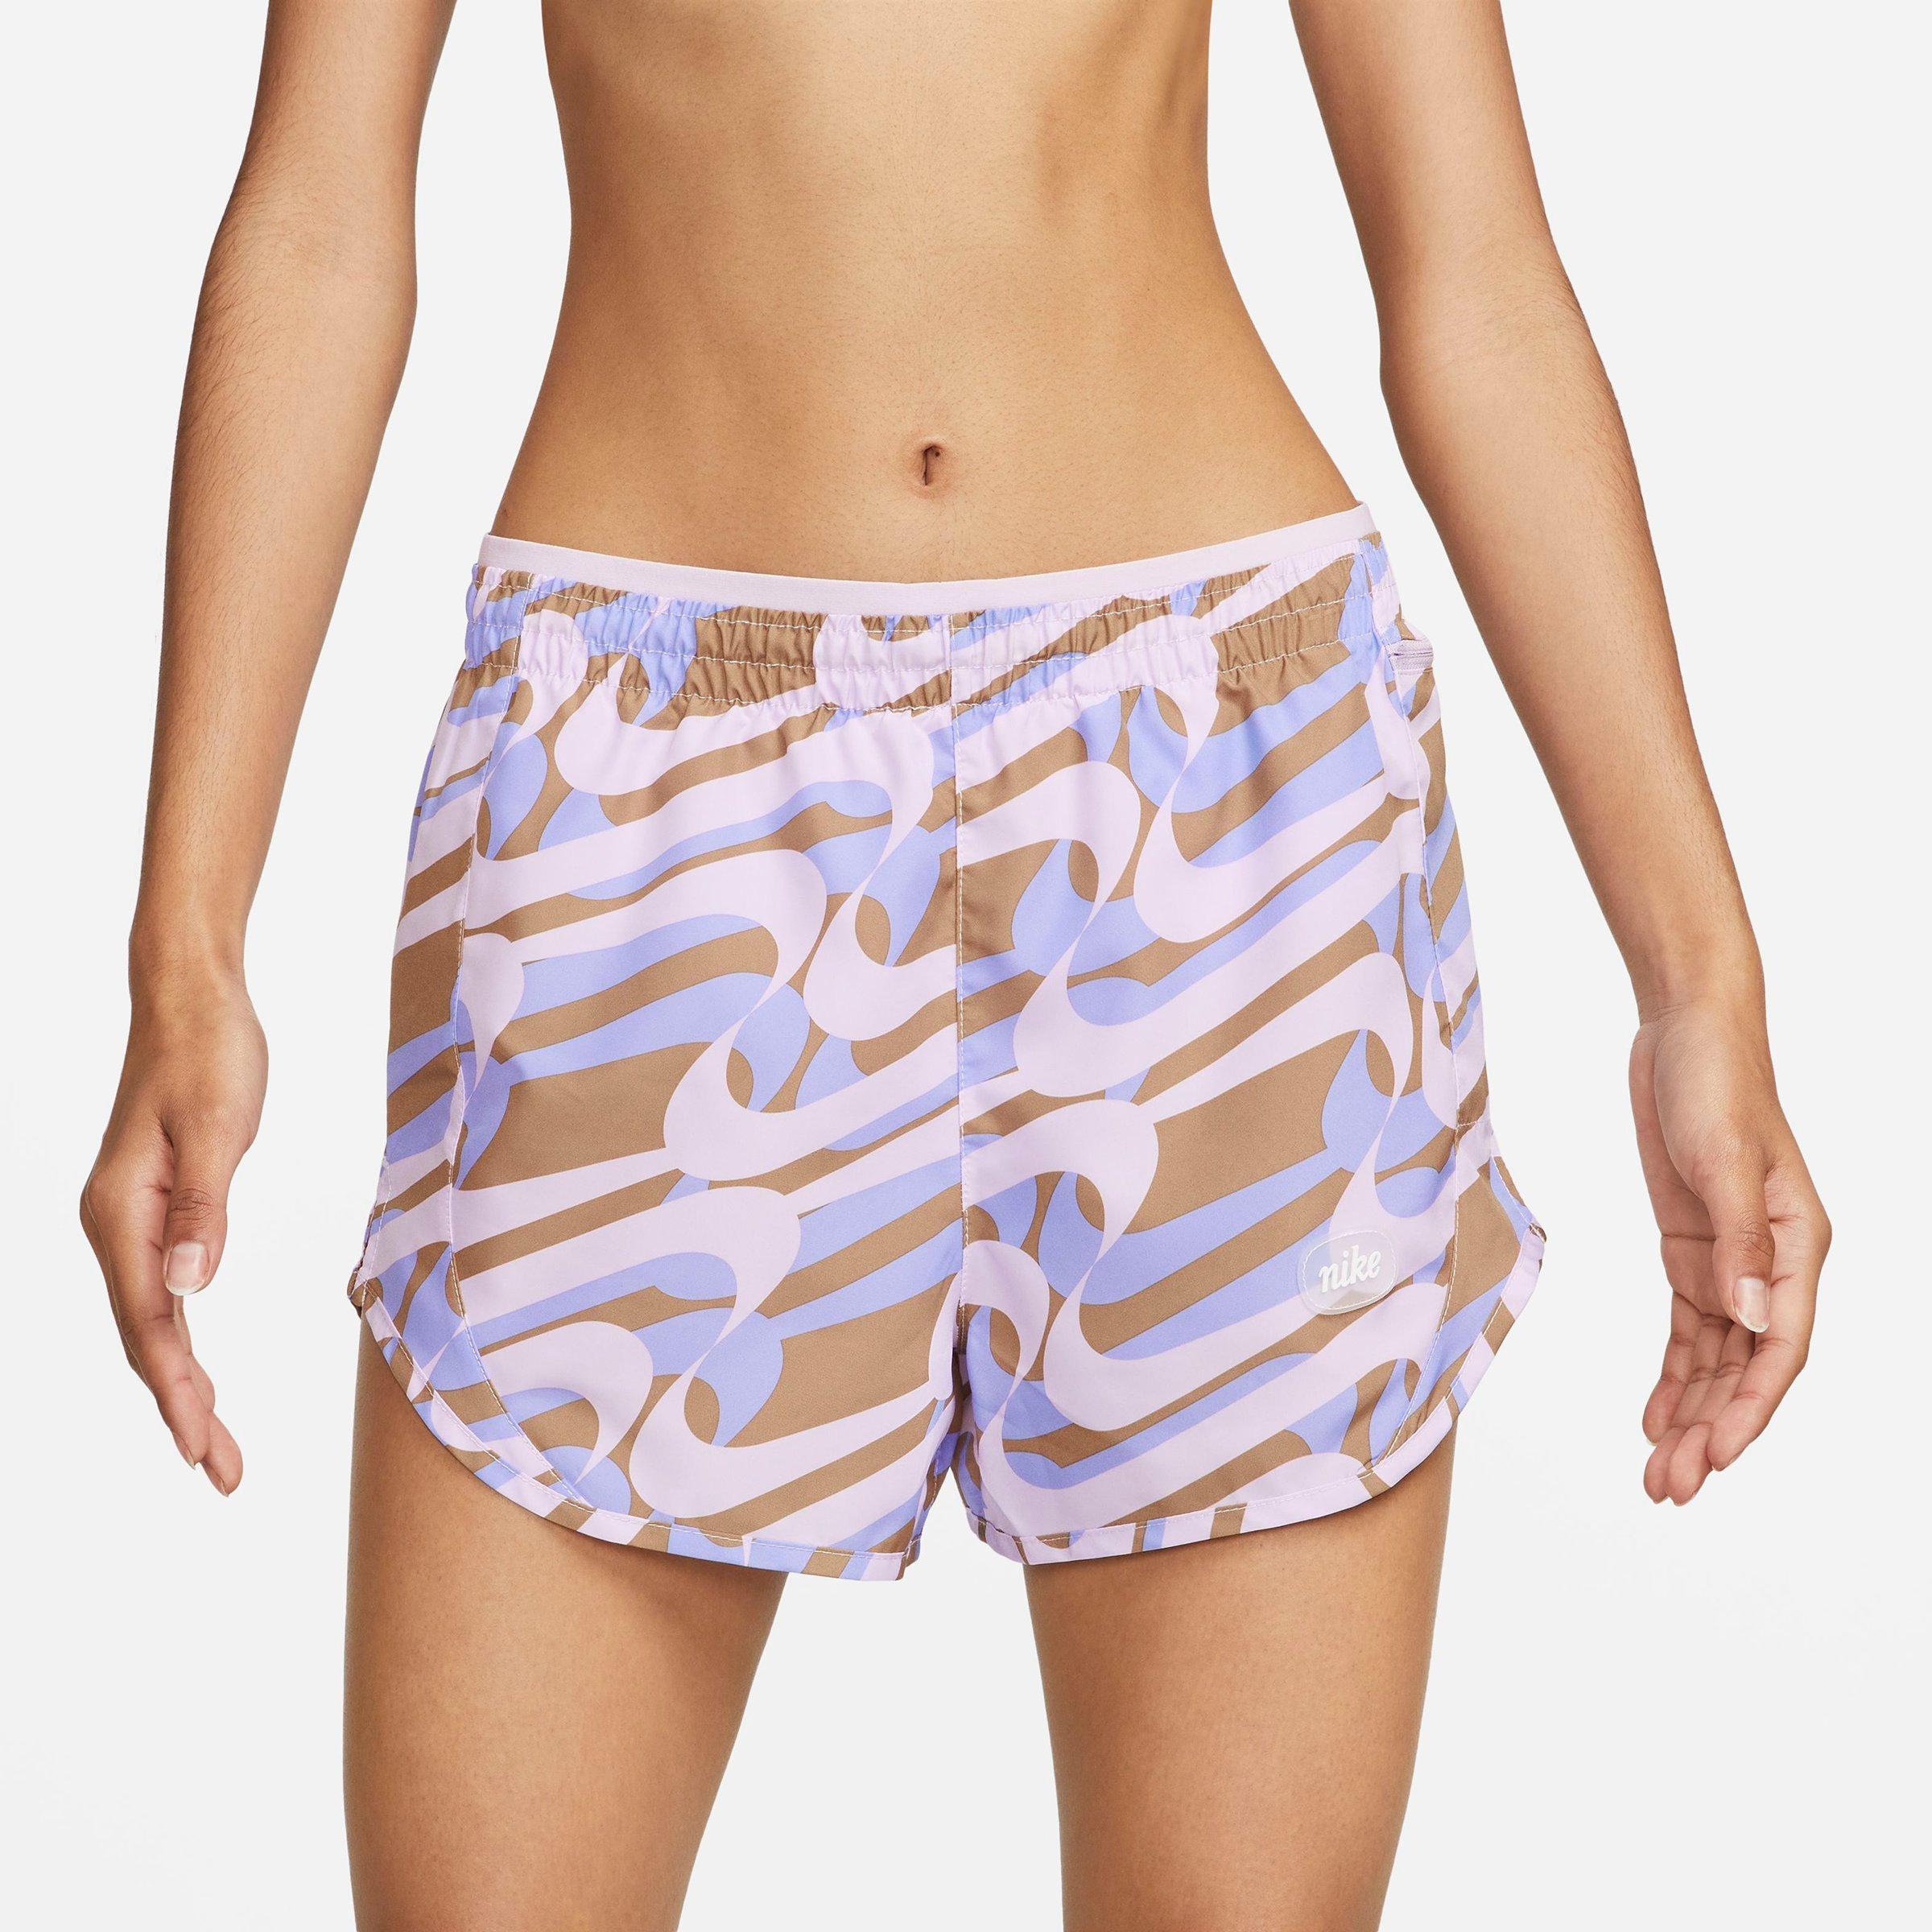 UPC 196149000022 product image for Nike Women's Dri-FIT Icon Clash Tempo Luxe Printed Running Shorts in Purple/Doll | upcitemdb.com